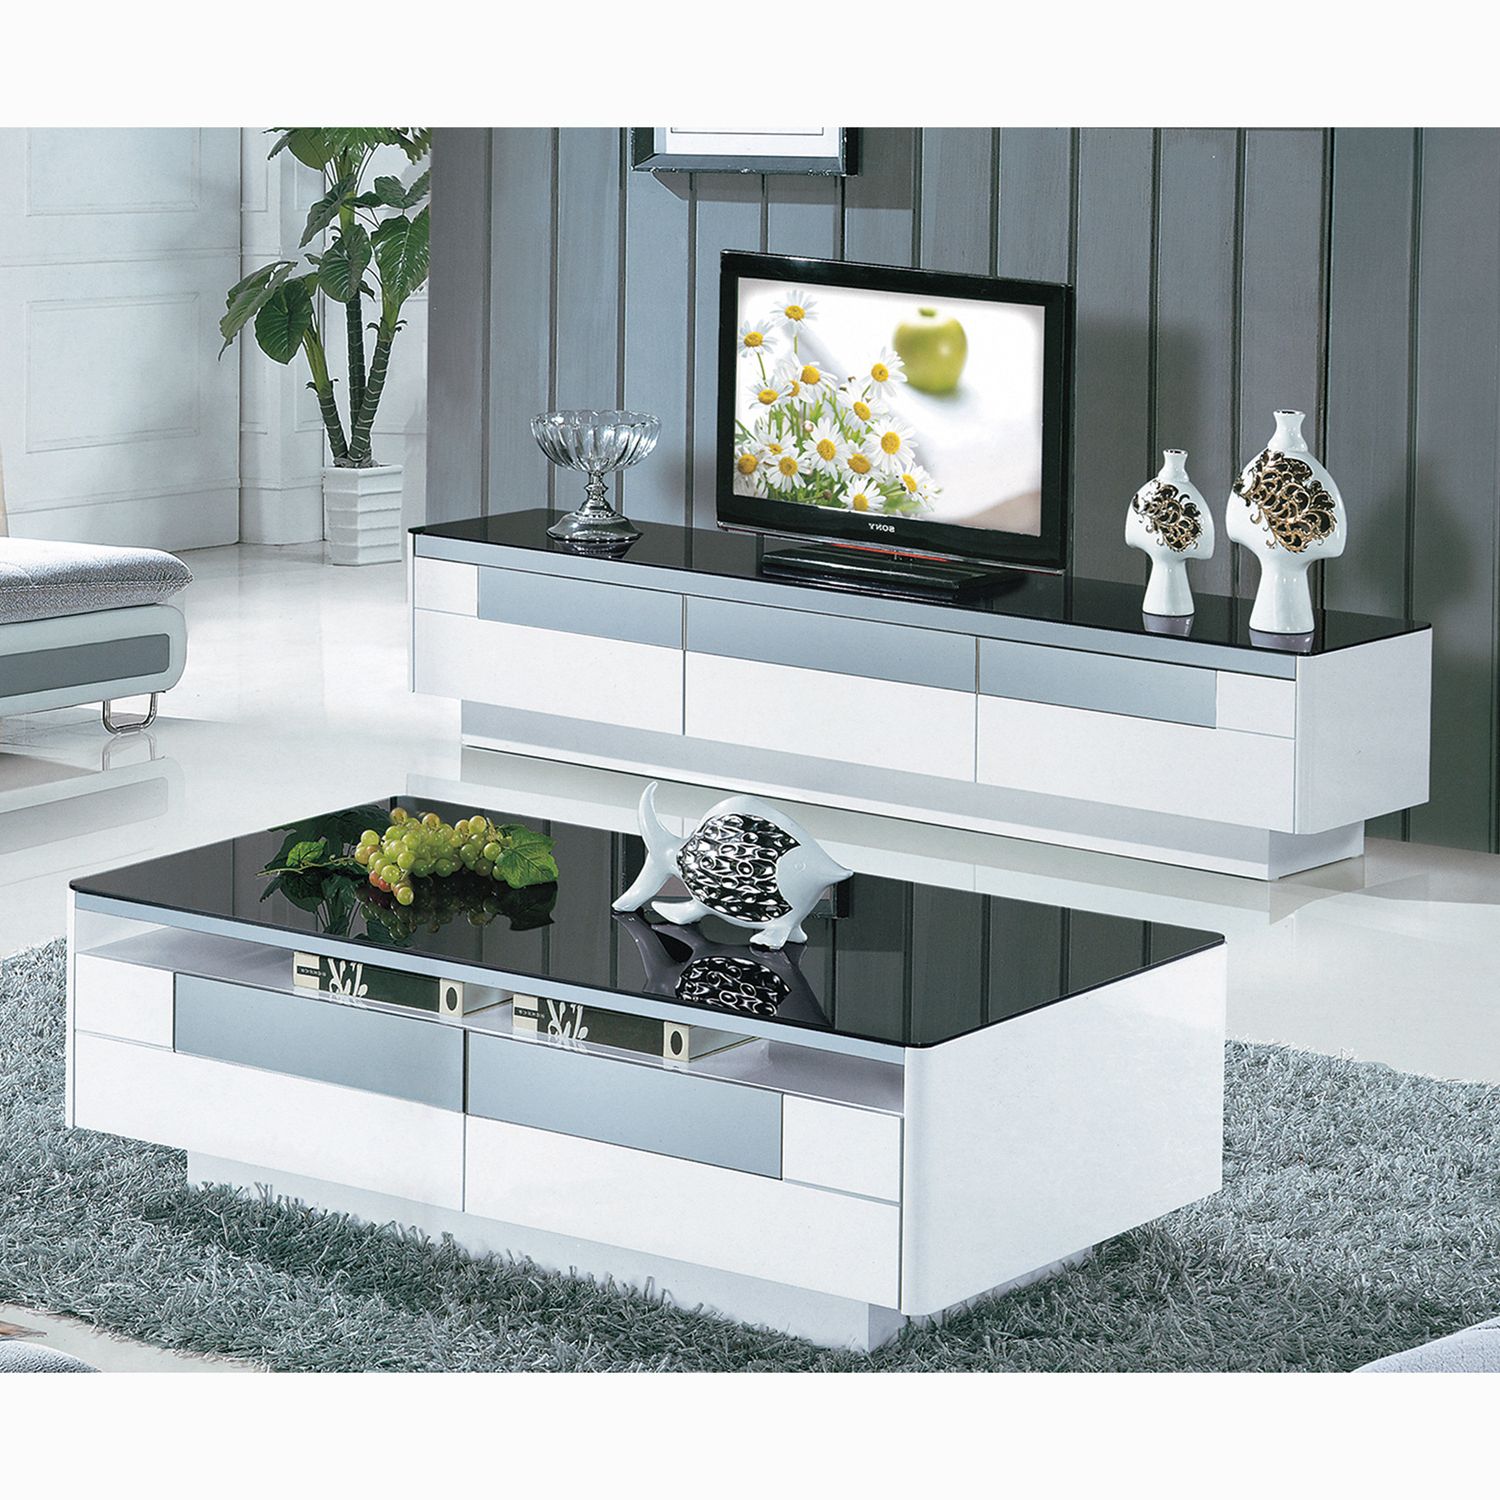 Fashionable Coffee Table And Tv Unit Sets For 14 Tv Unit Coffee Table Set Ideas (View 16 of 20)